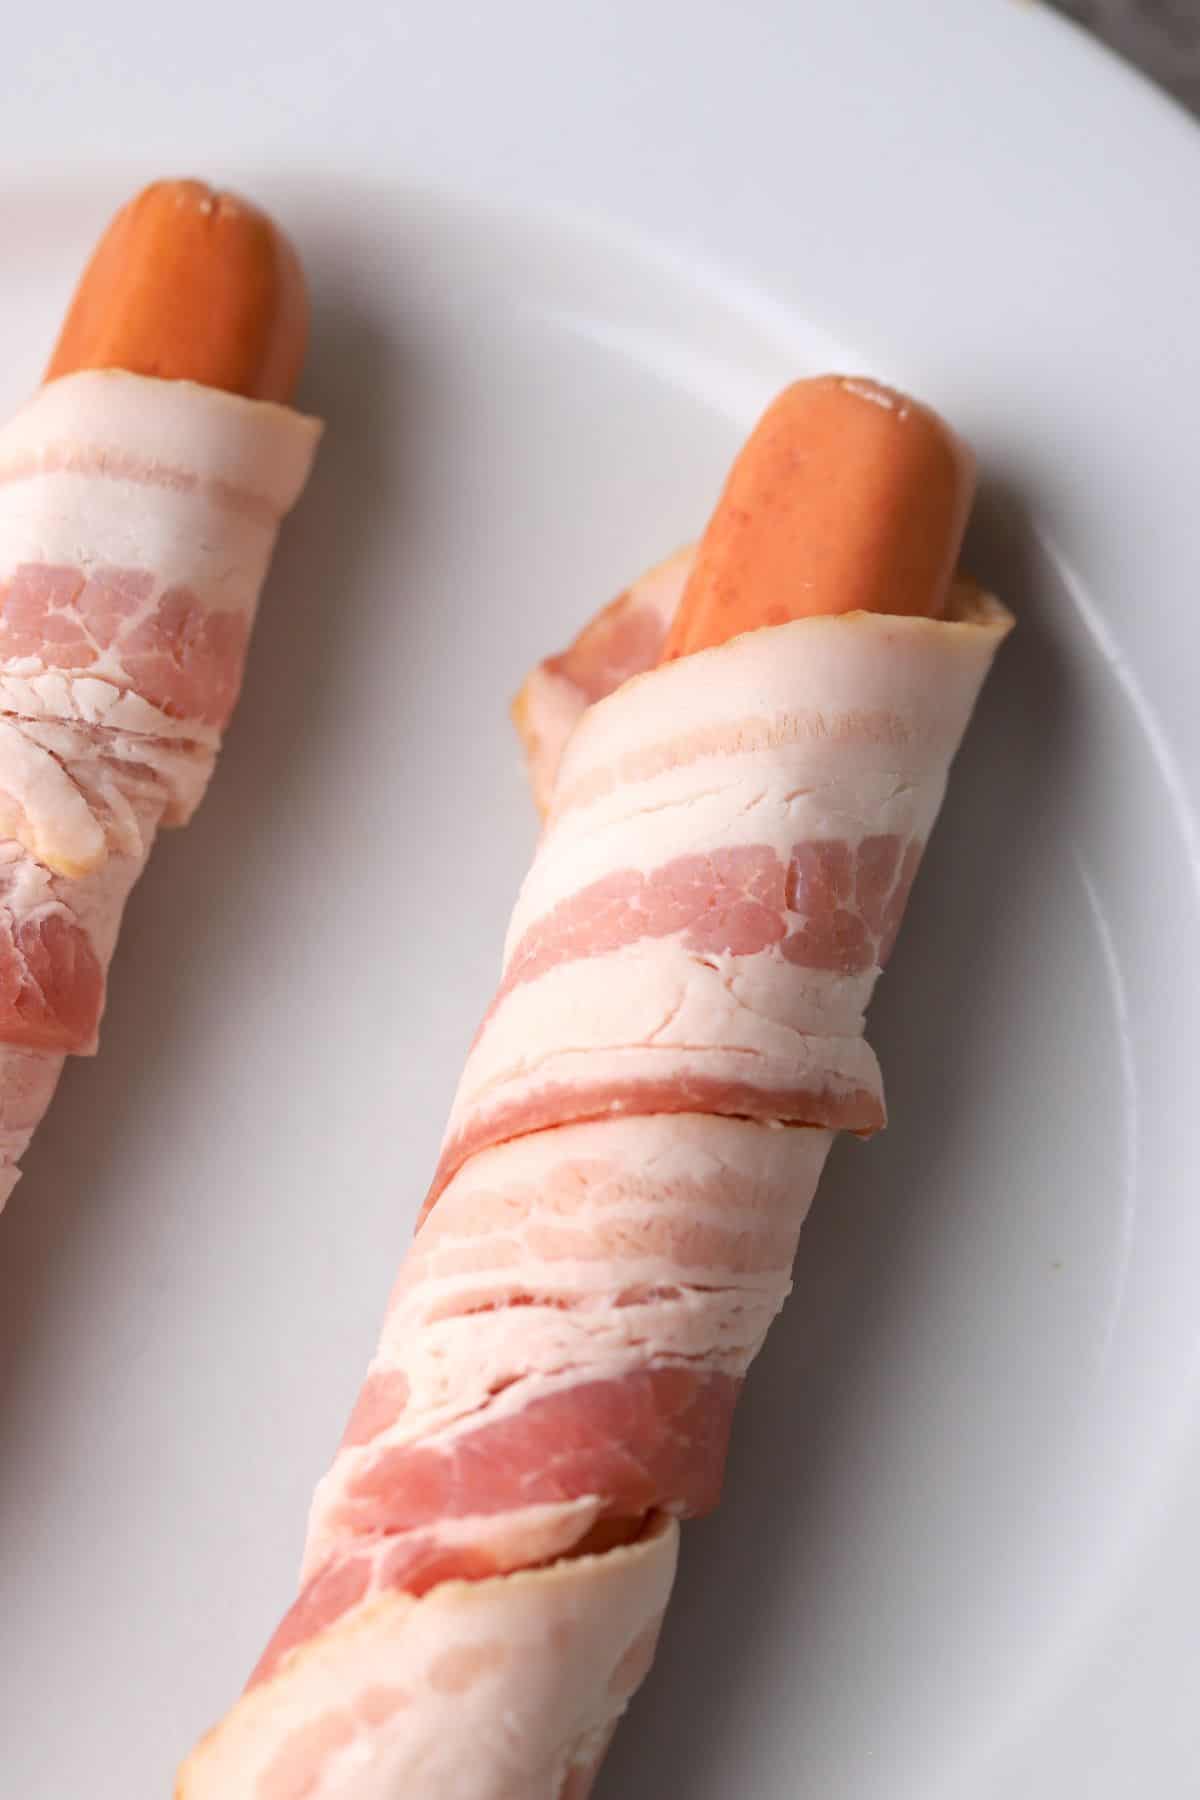 two uncooked bacon wrapped hot dogs.